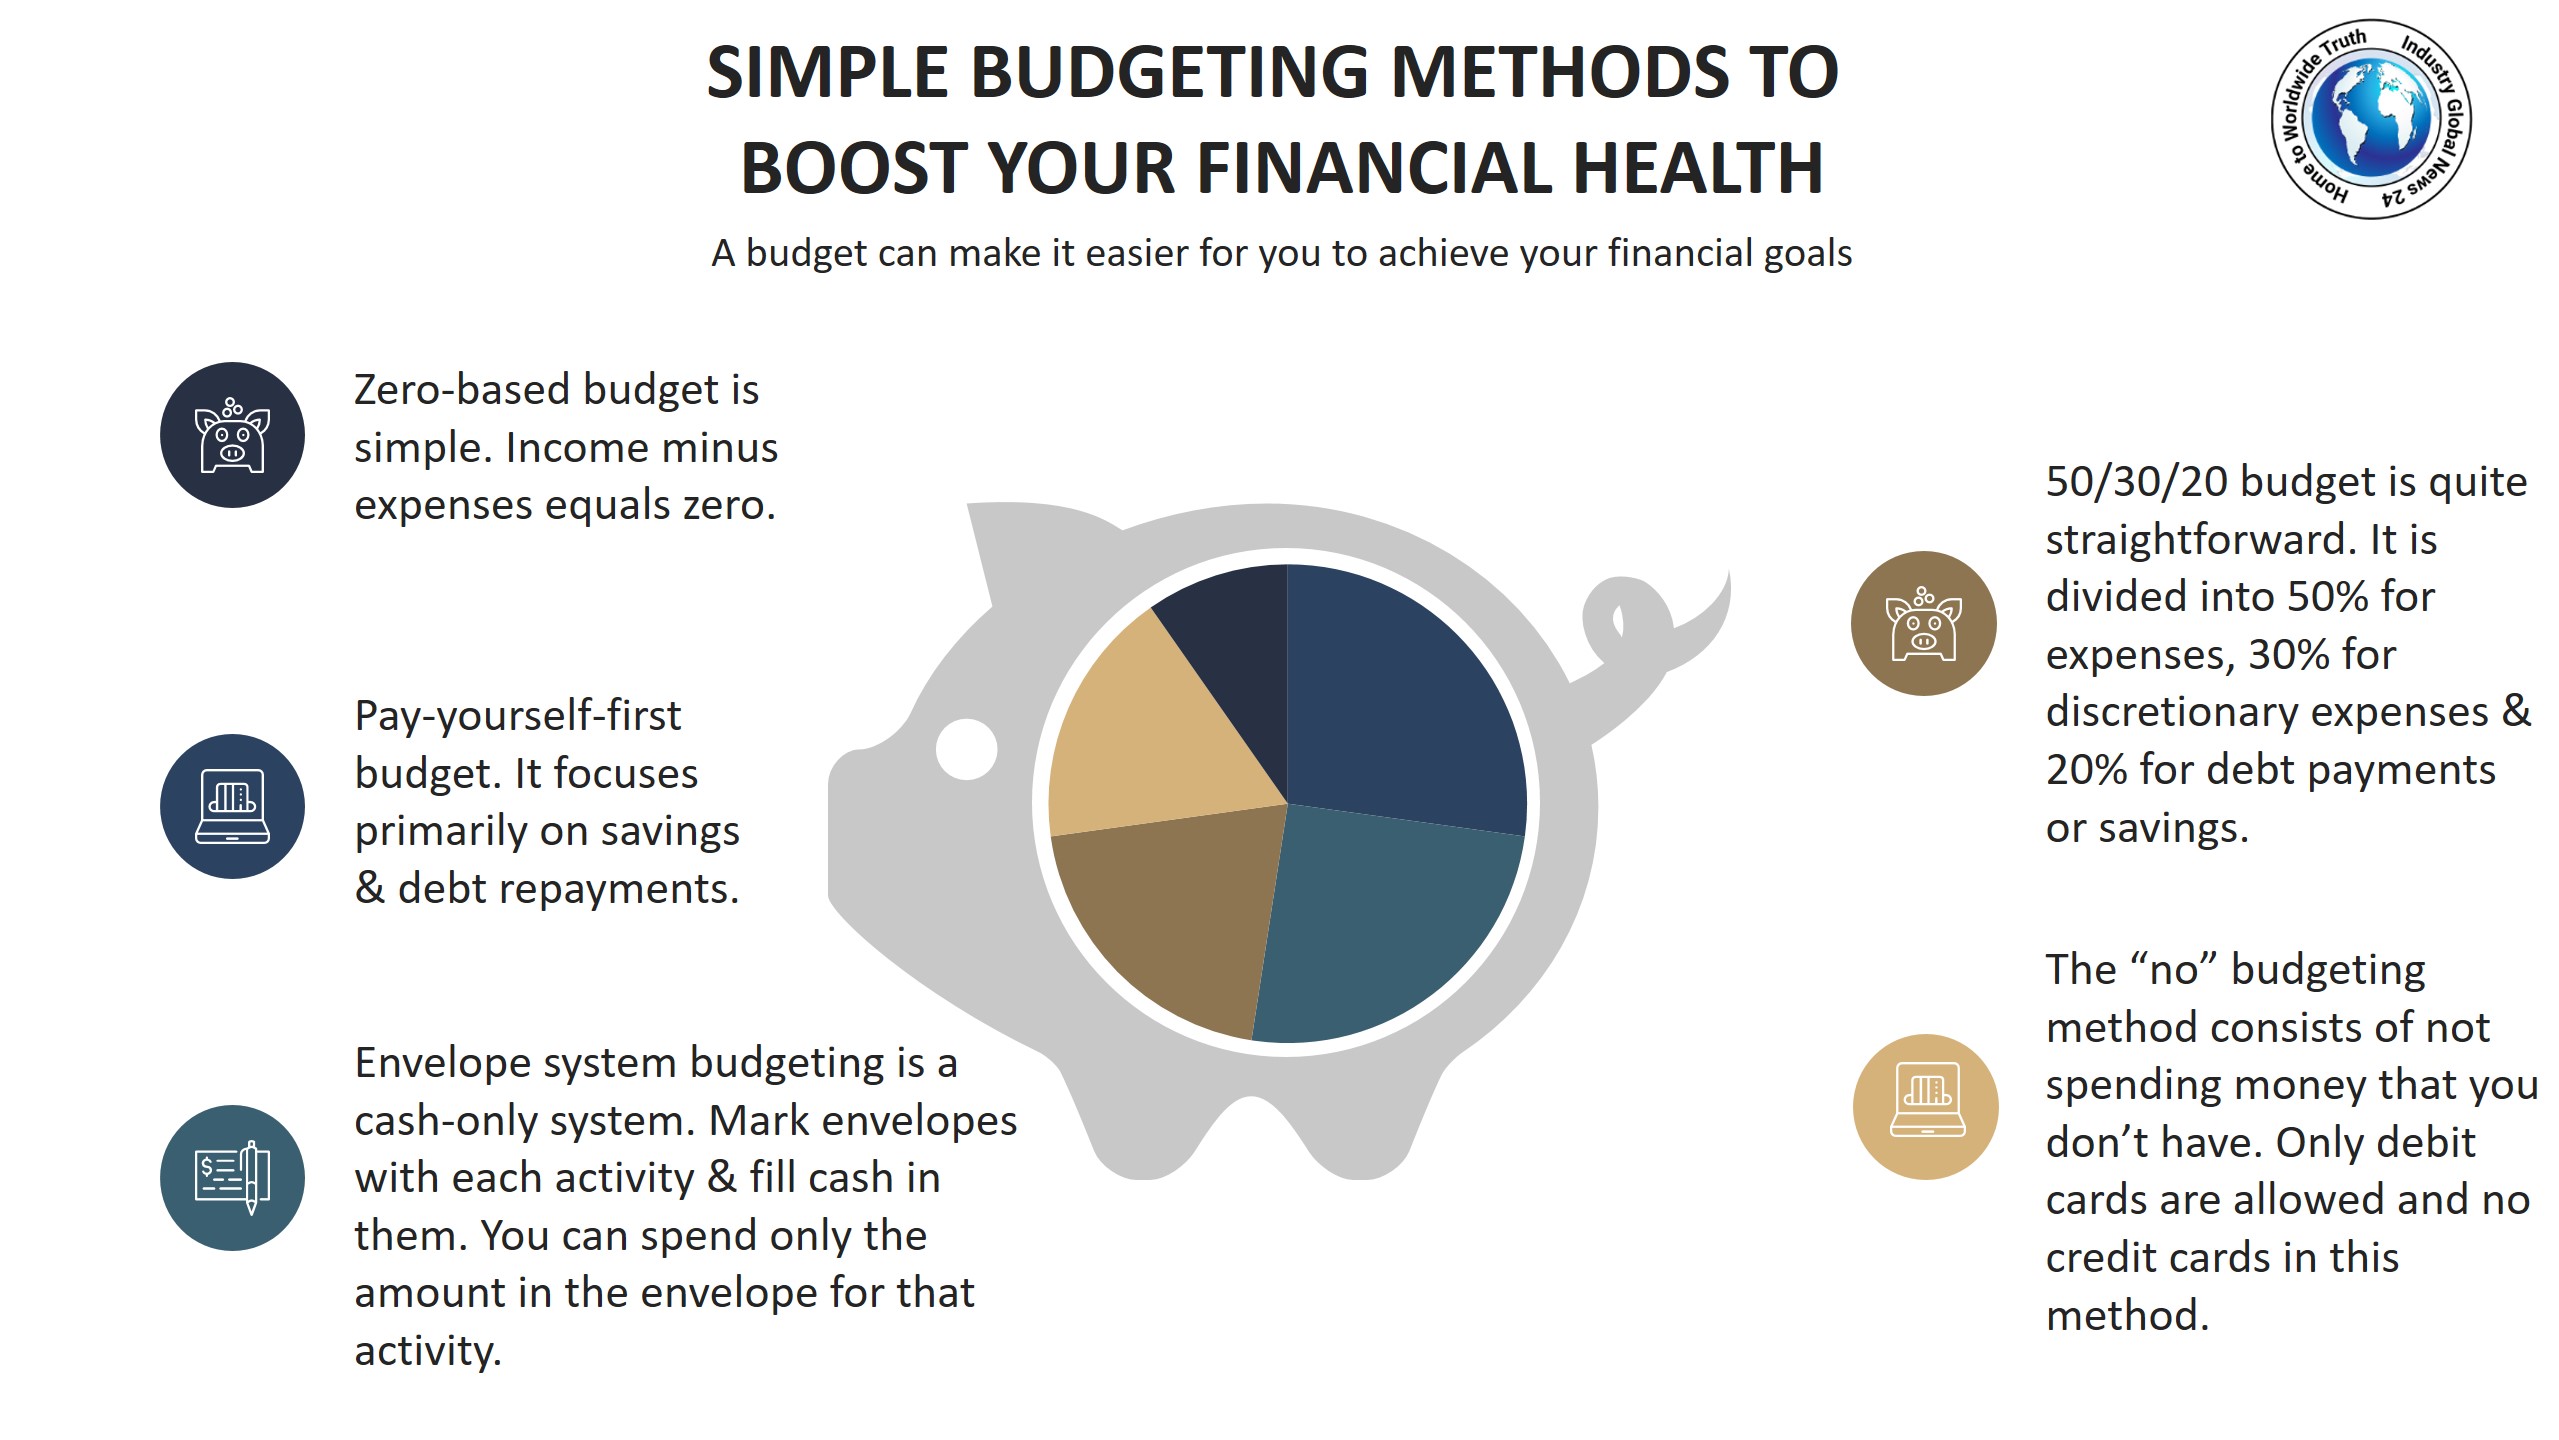 Simple budgeting methods to boost your financial health